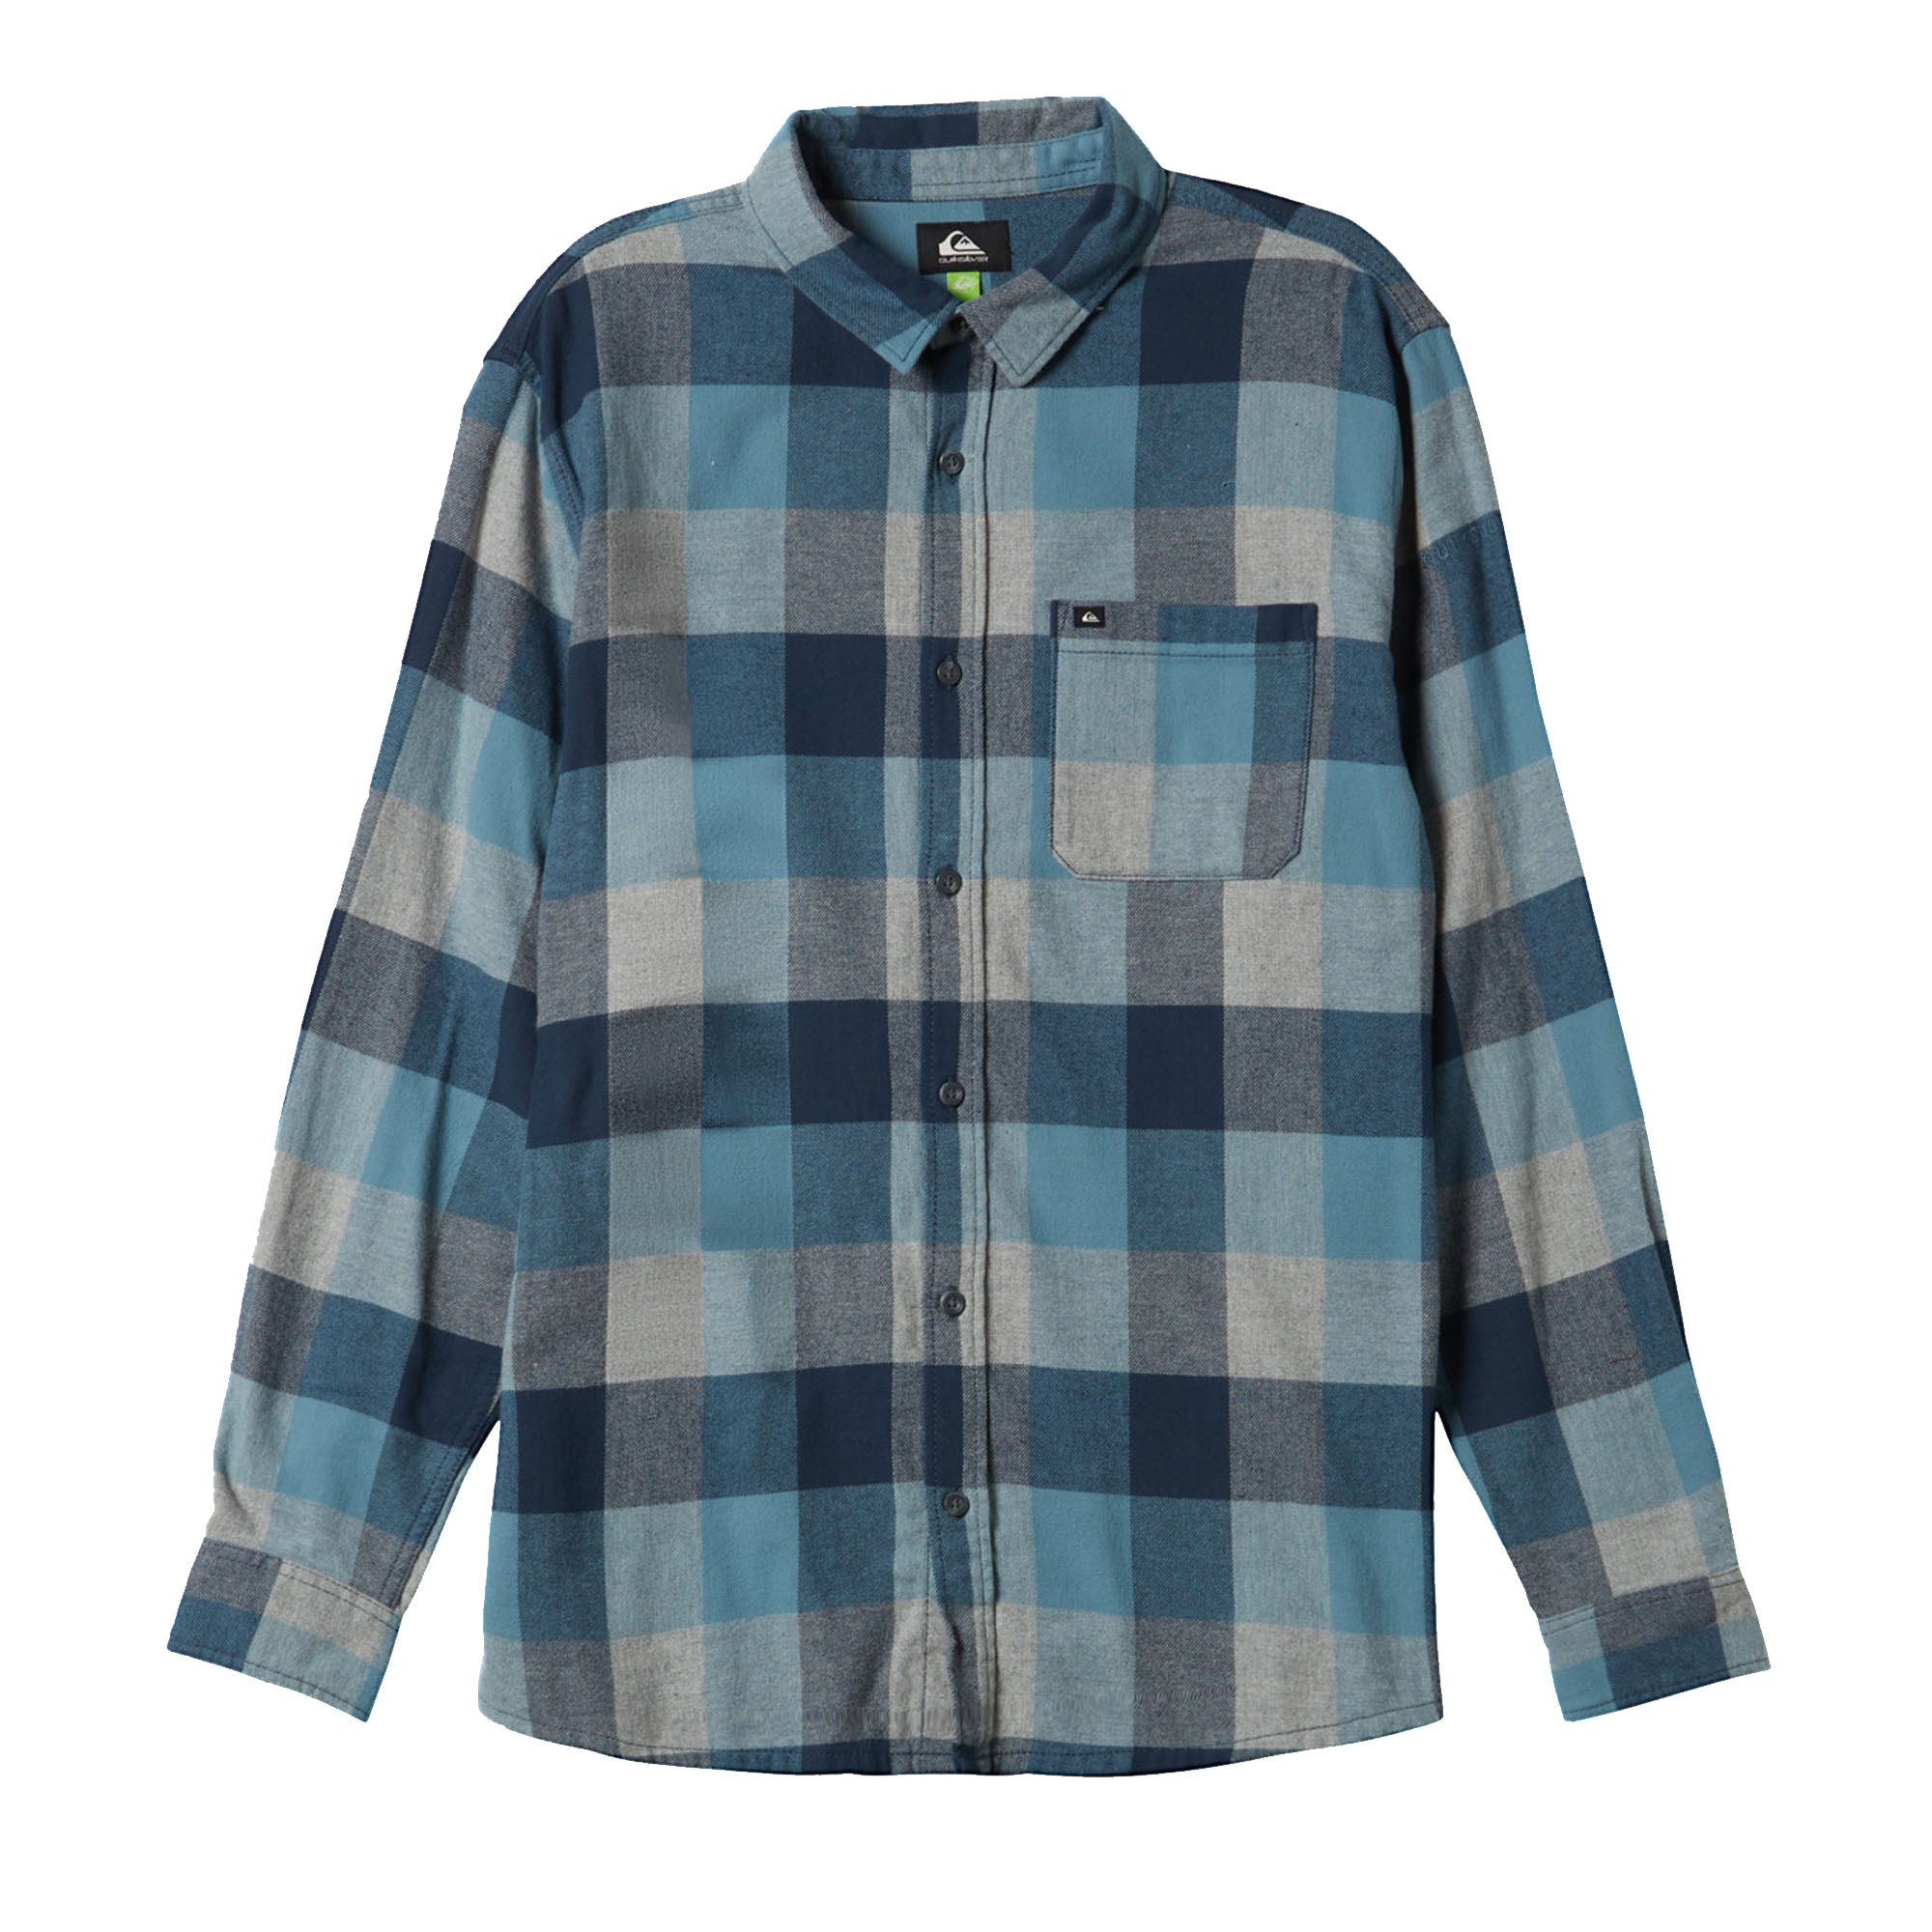 Quiksilver Motherfly Youth Boy's L/S Flannel